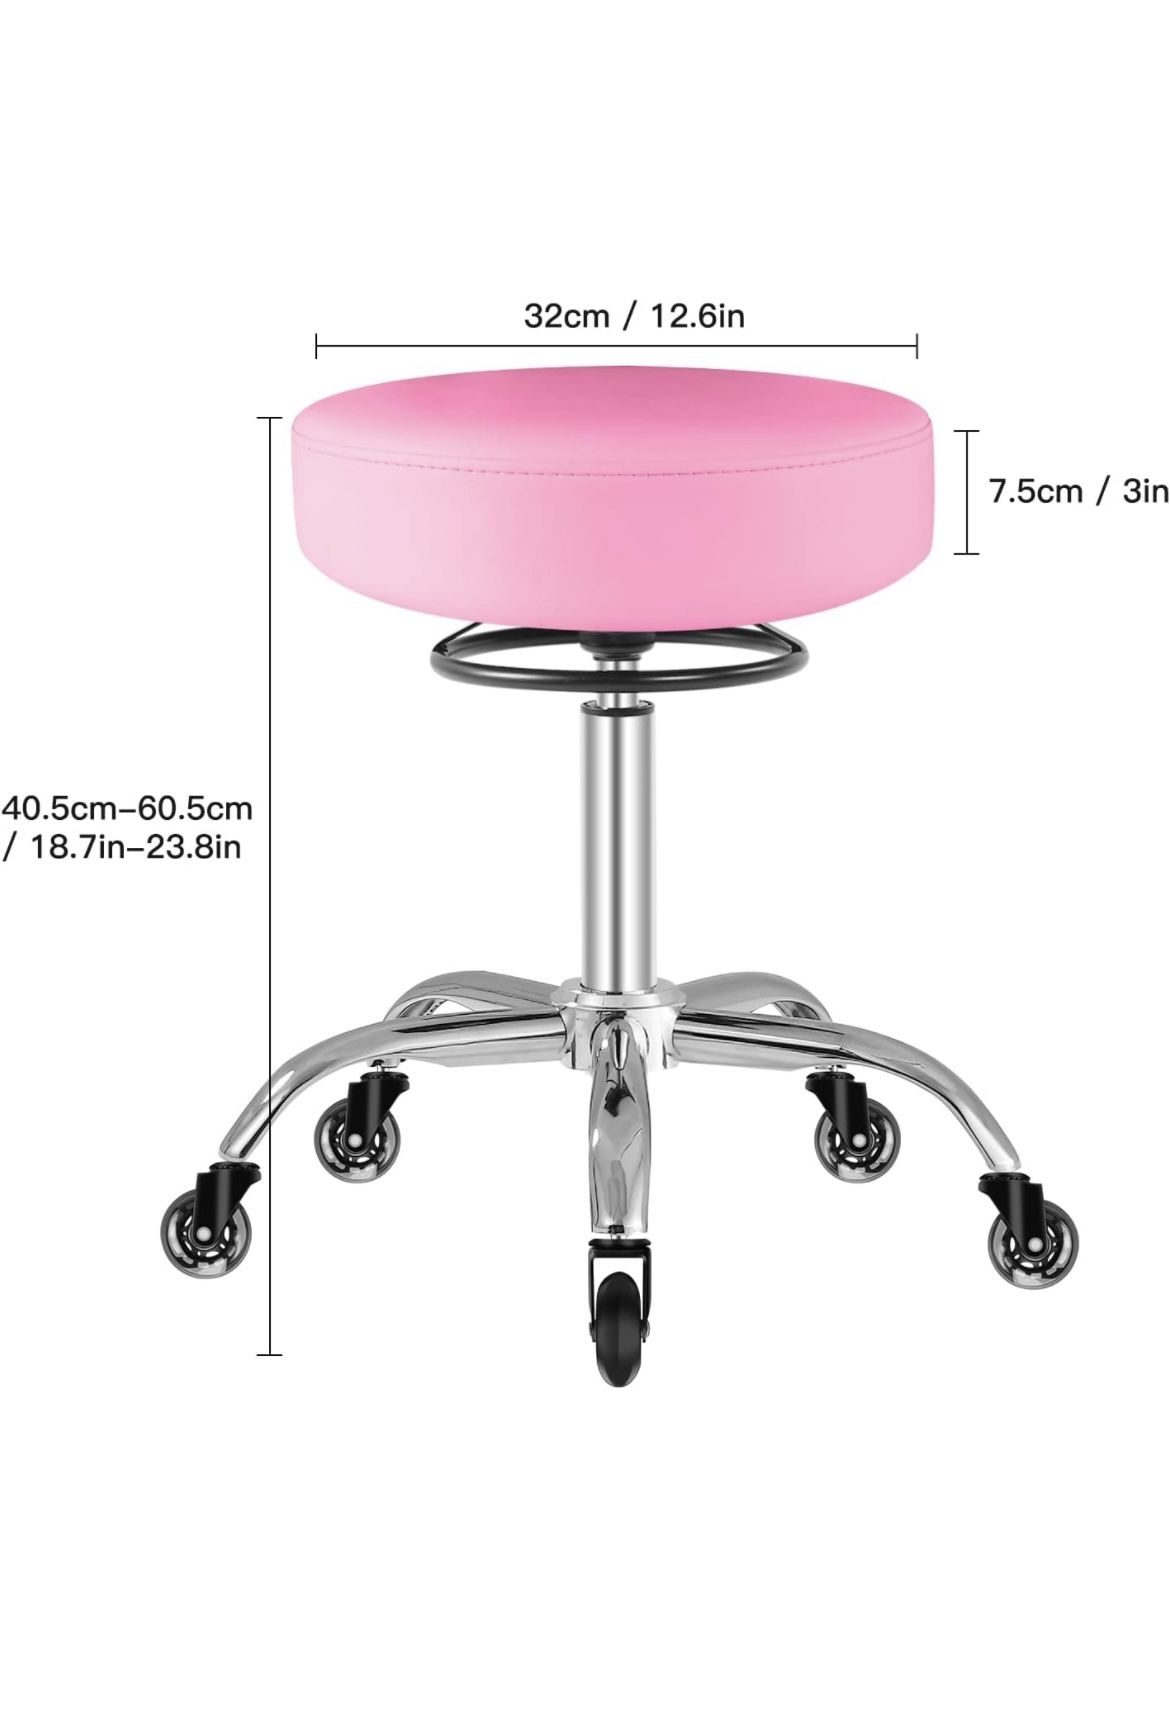 Brand New Lash Bed & Pink Stool